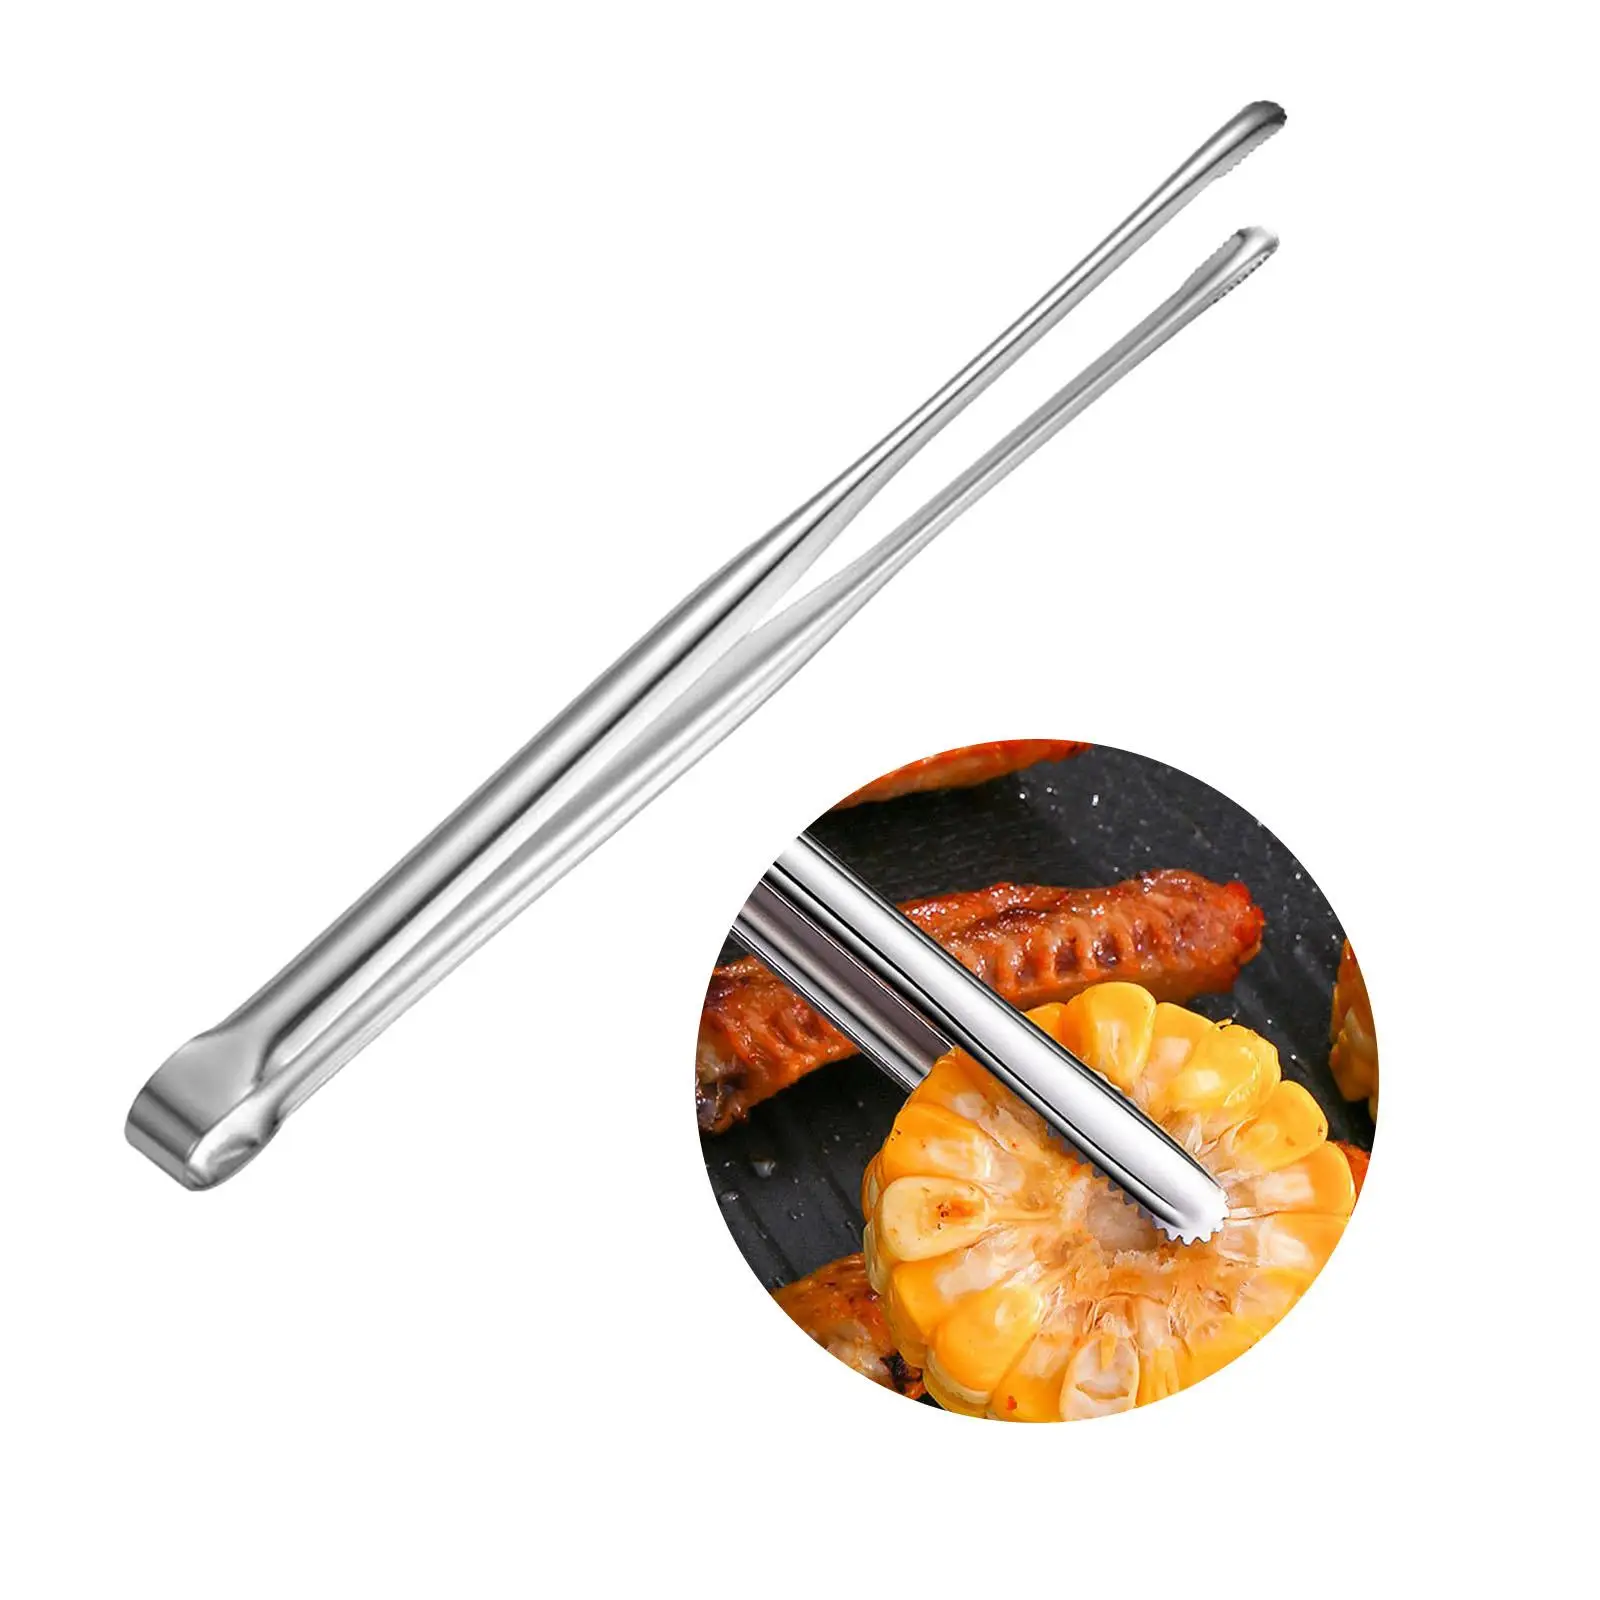 BBQ Tongs Kitchen Cooking Tongs Tweezers Heavy Duty Stainless Steel Non Stick